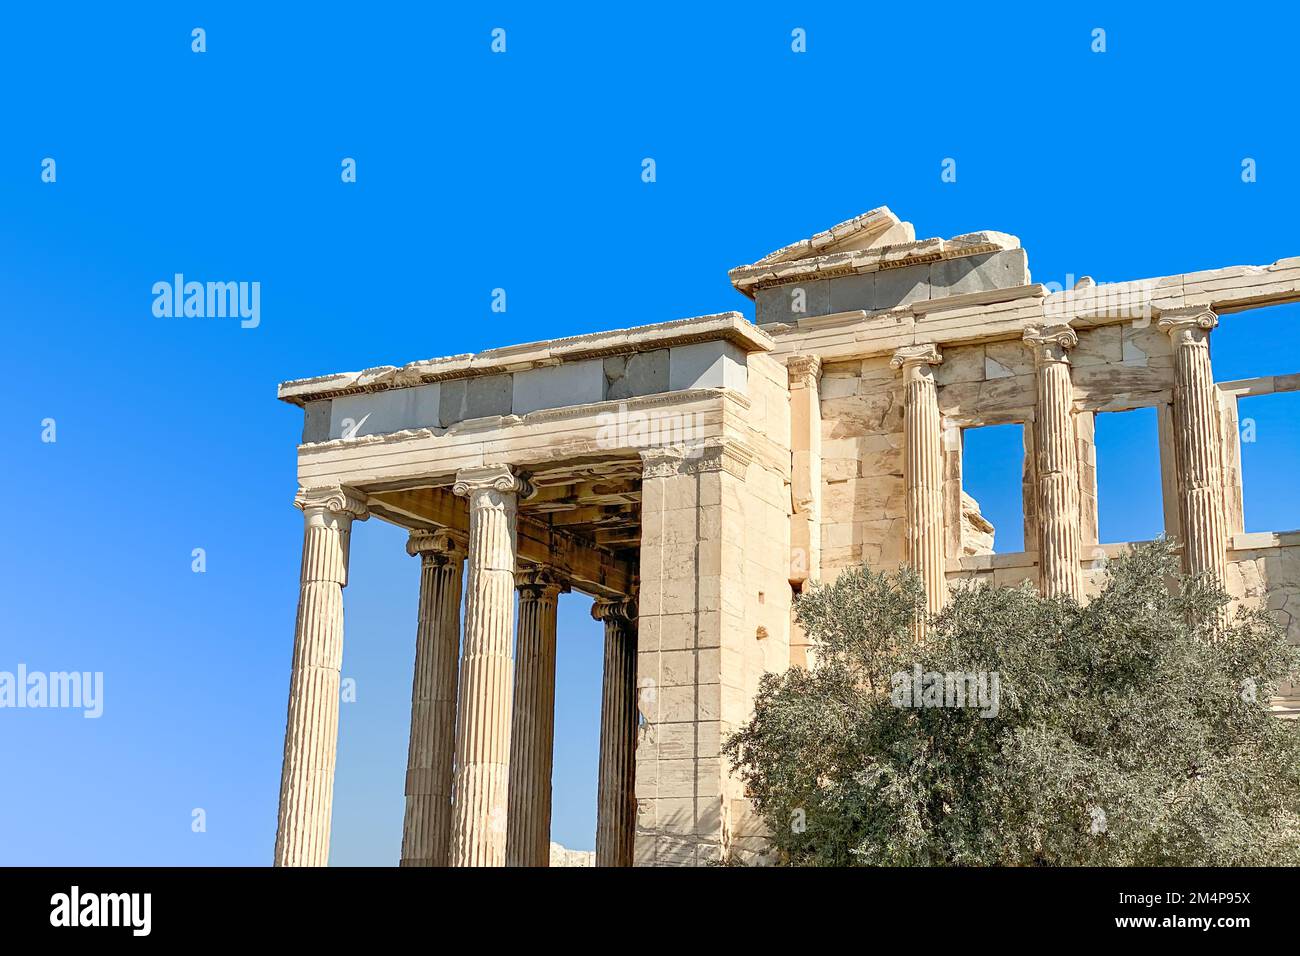 Detailed view of the сolonnade of The Acropolis of Athens, Greece Stock Photo